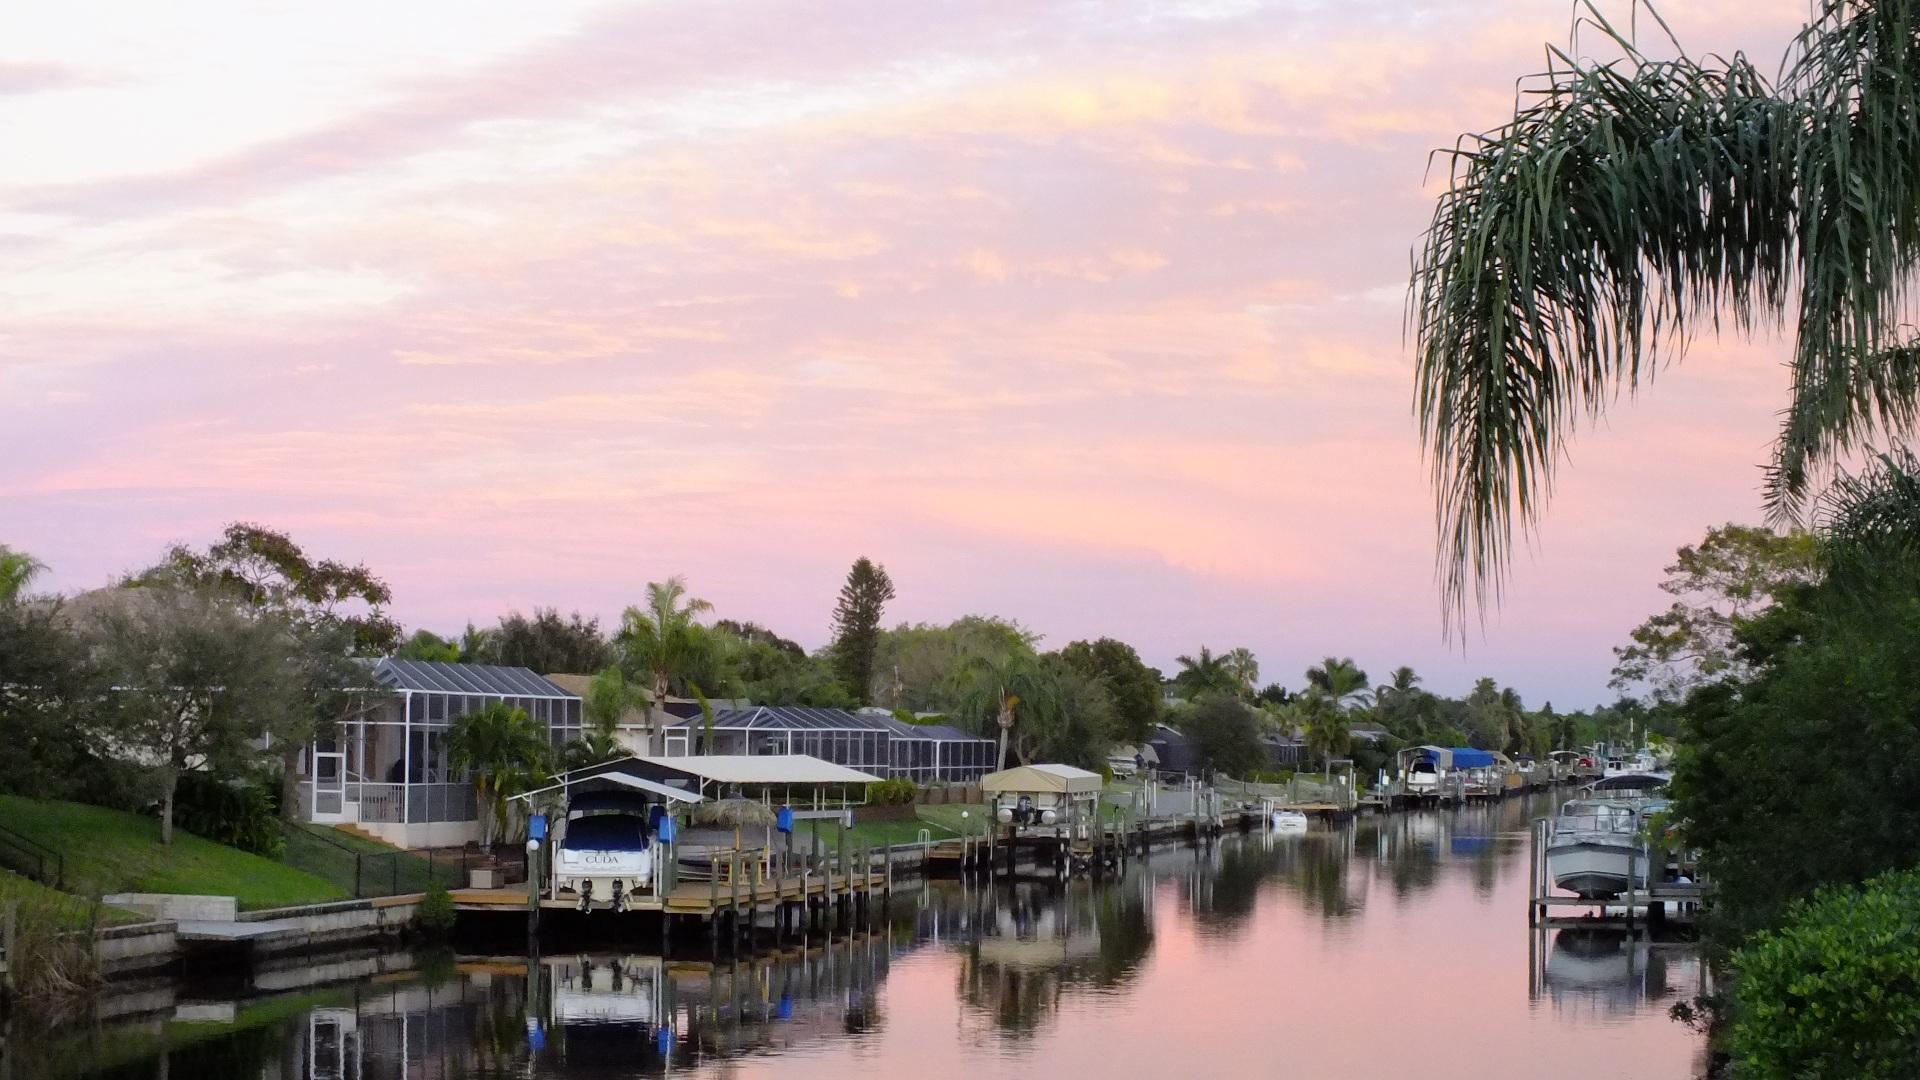 Cape Coral is known today for its waterfront homes and beautiful sunsets in the heart of SWFL.